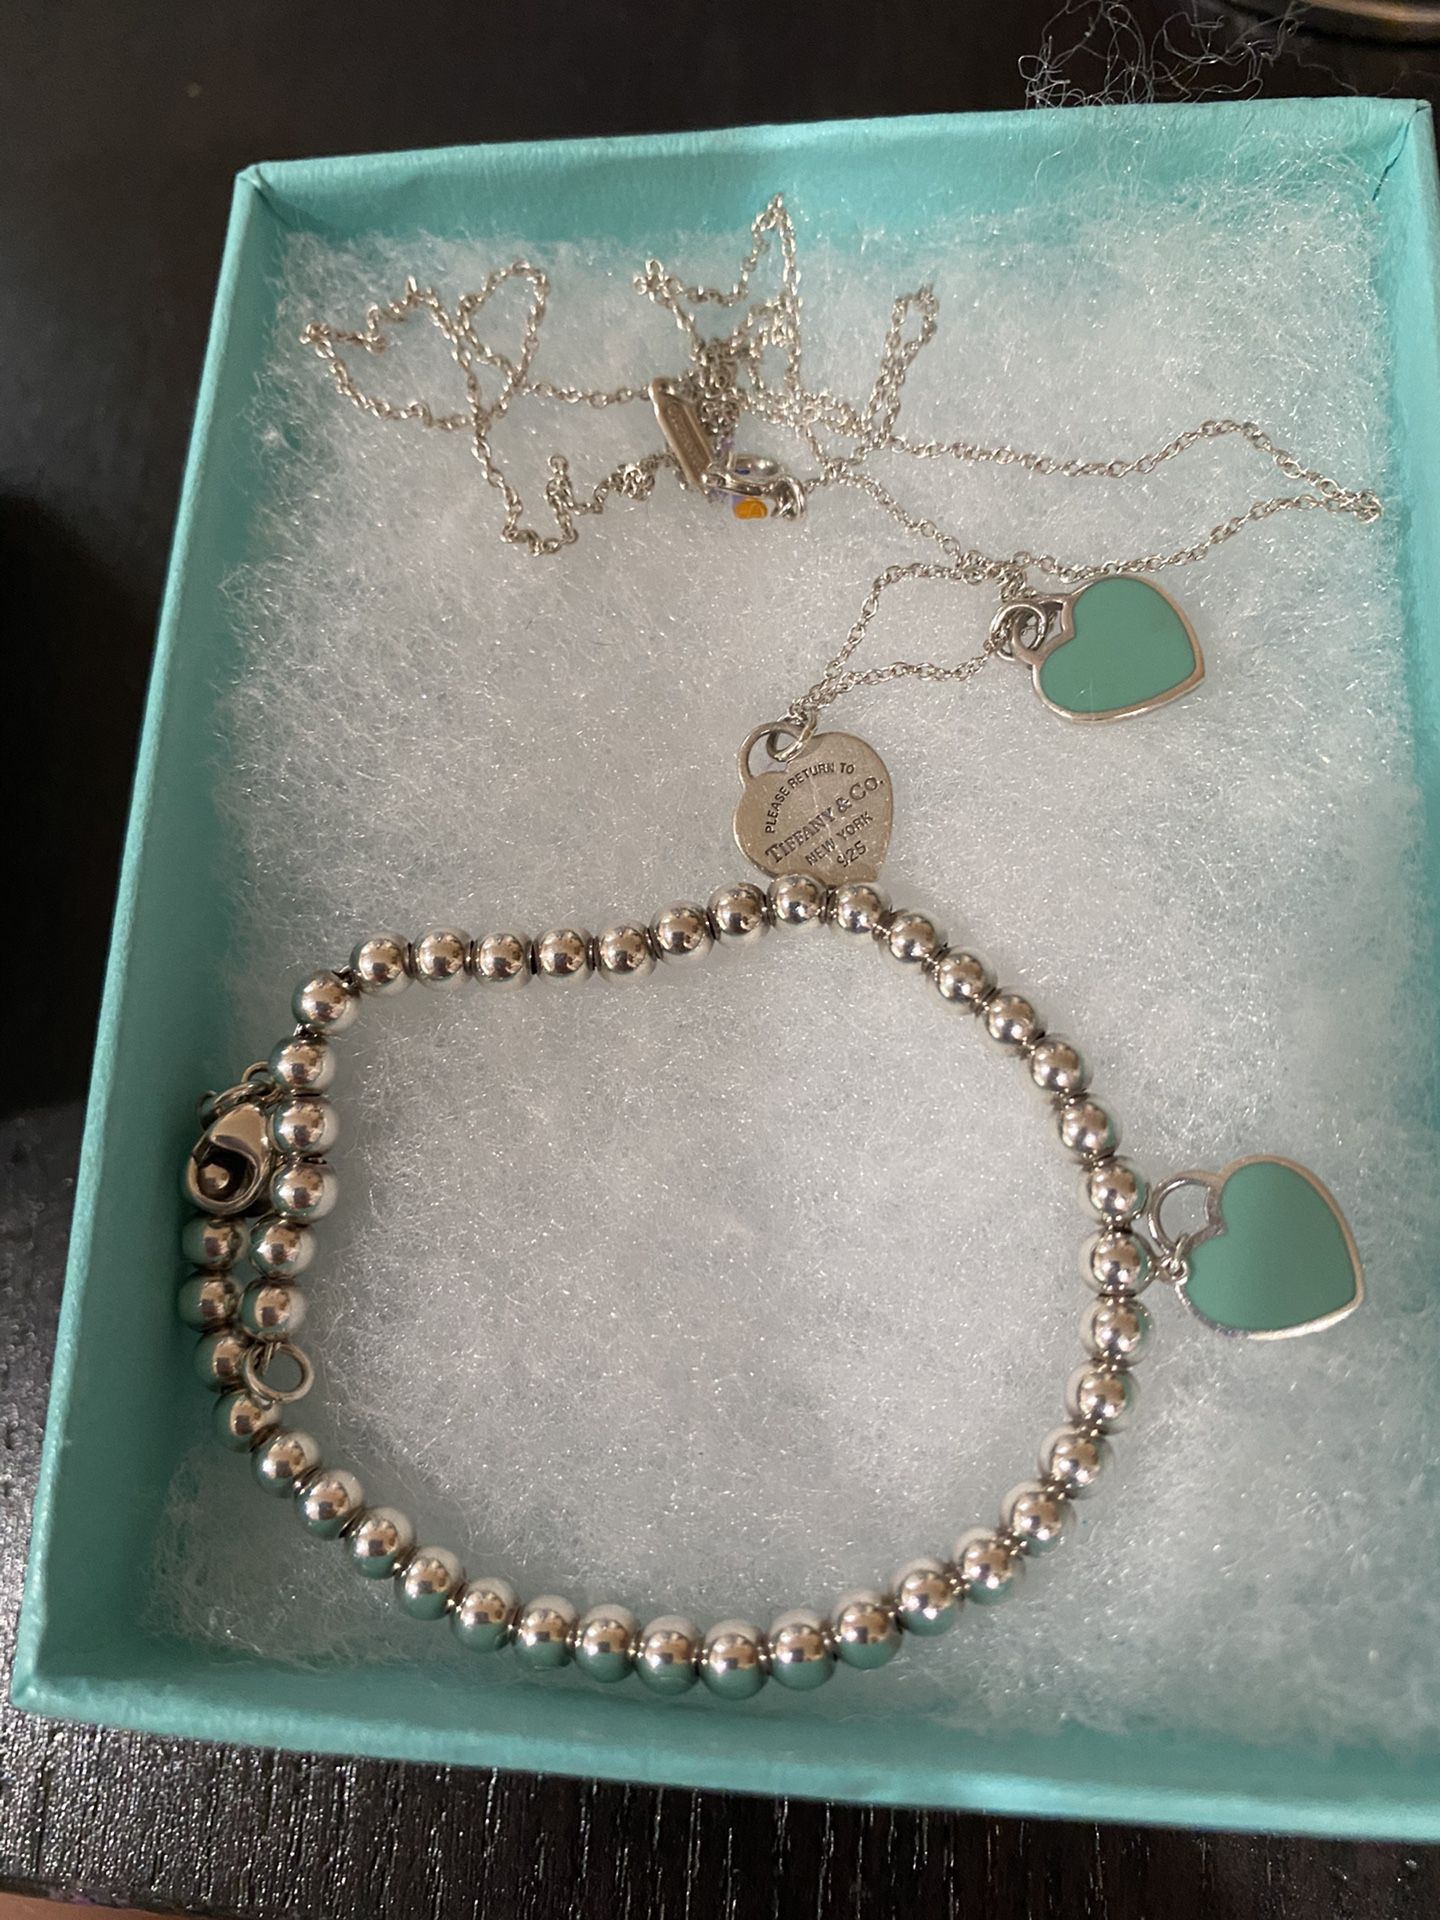 Authentic Tiffany & Co necklace and bracelet teal heart with box bag and receipt